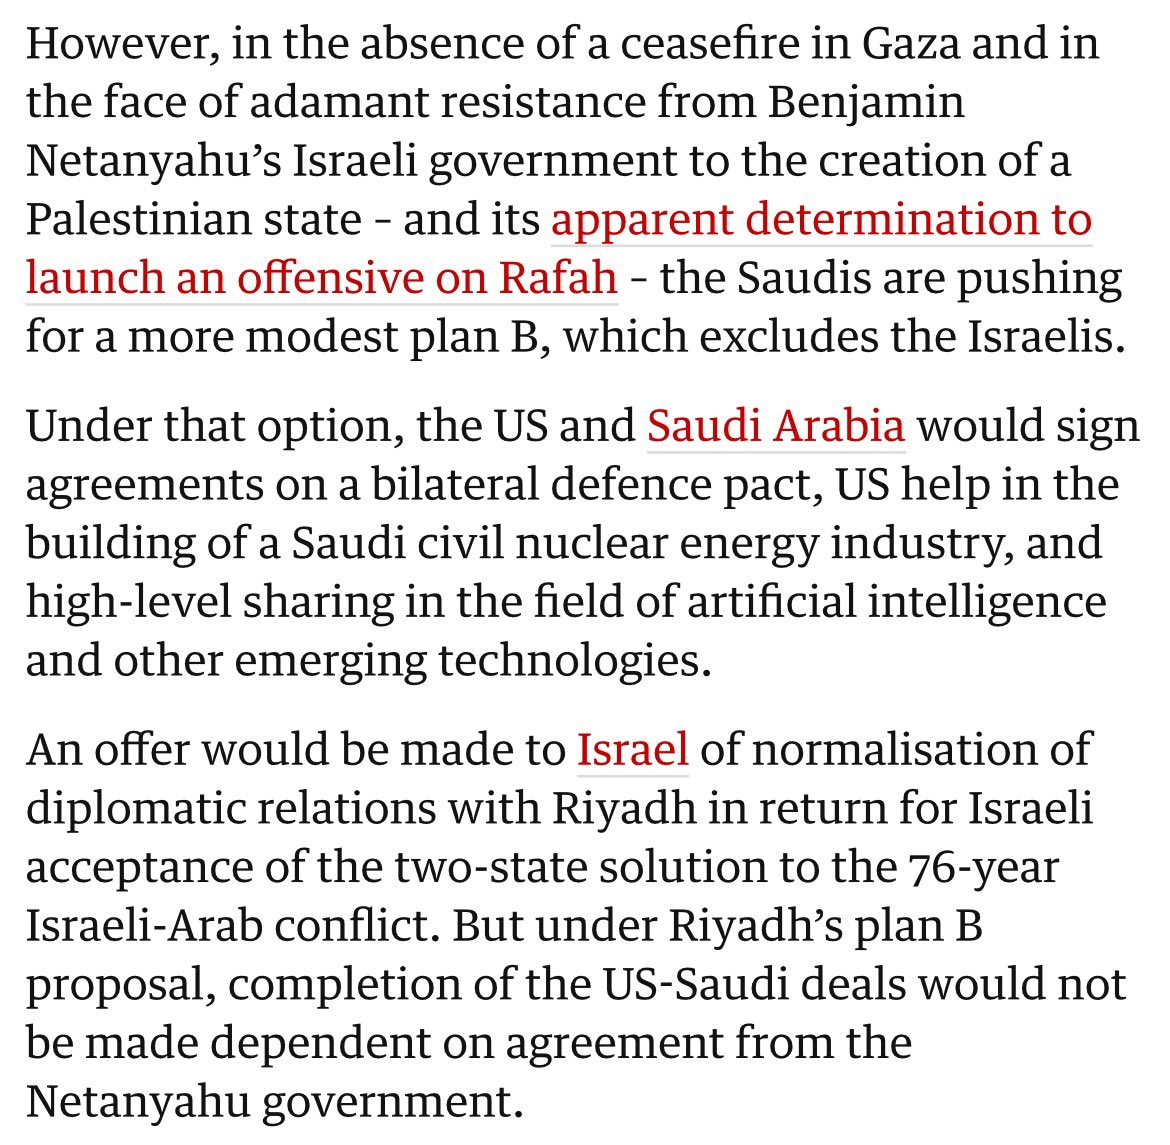 Saudi Arabia now pushing for a Plan B with the U.S. in the event Netanyahu is intransigent on the Palestinian issue (he is). As you might expect, it’s a one-way deal with Riyadh getting all the benefits and the U.S. getting zilch. How dumb do you have to be to sign this?